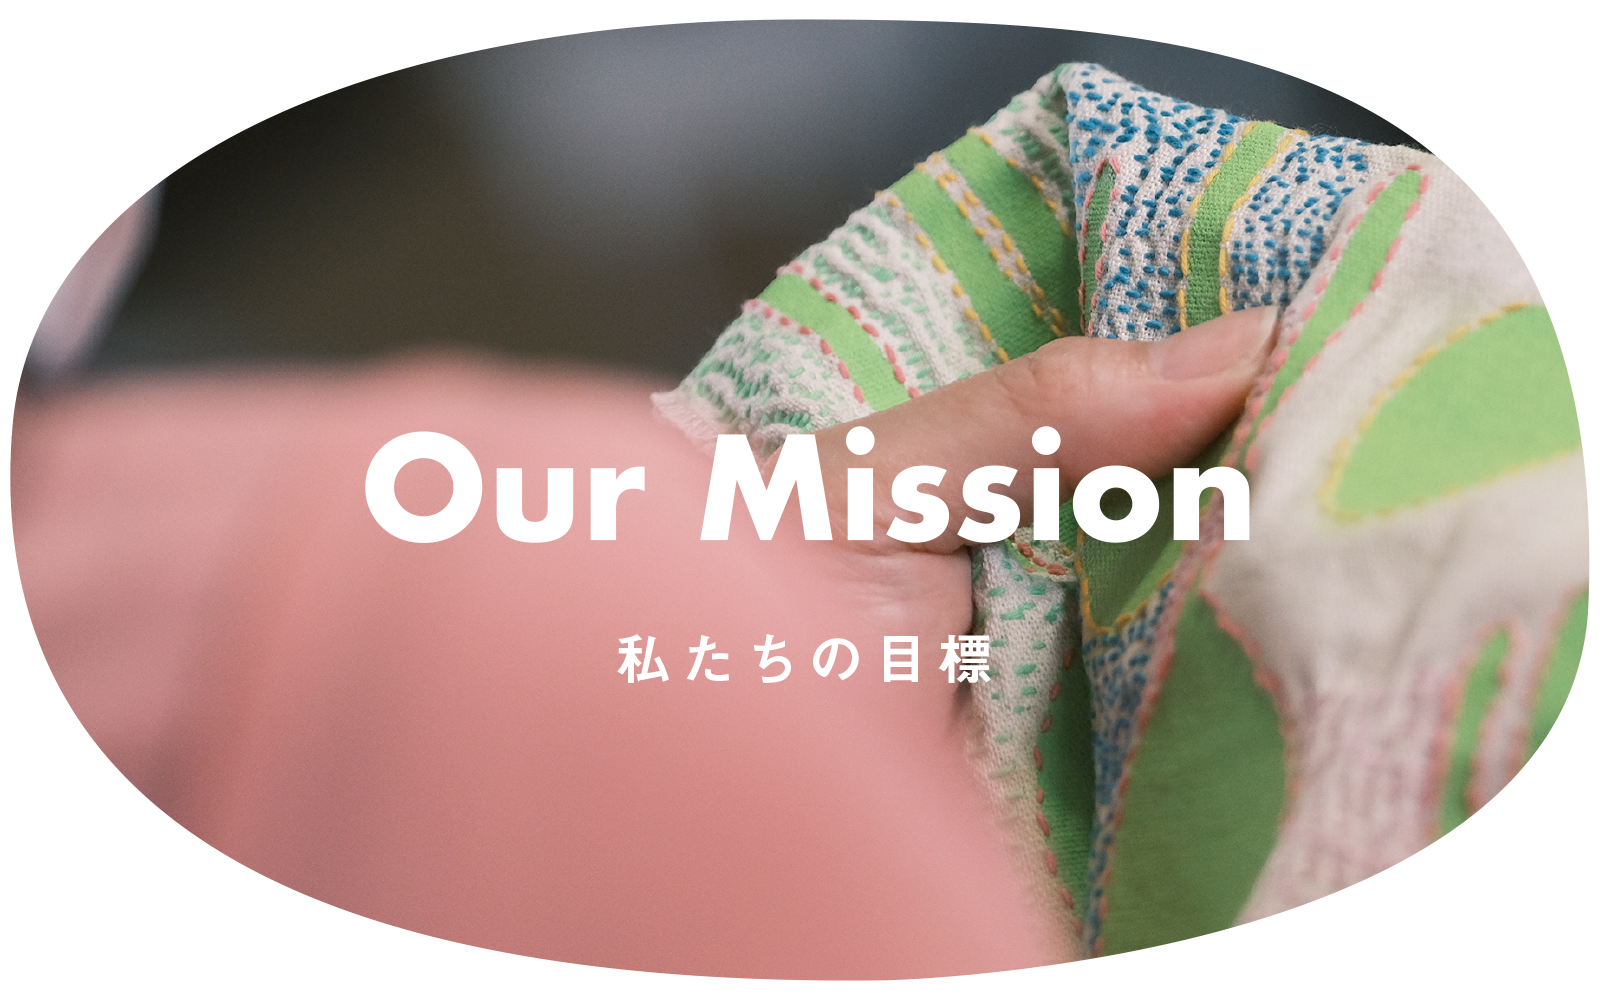 Our Mission -私たちの目標-